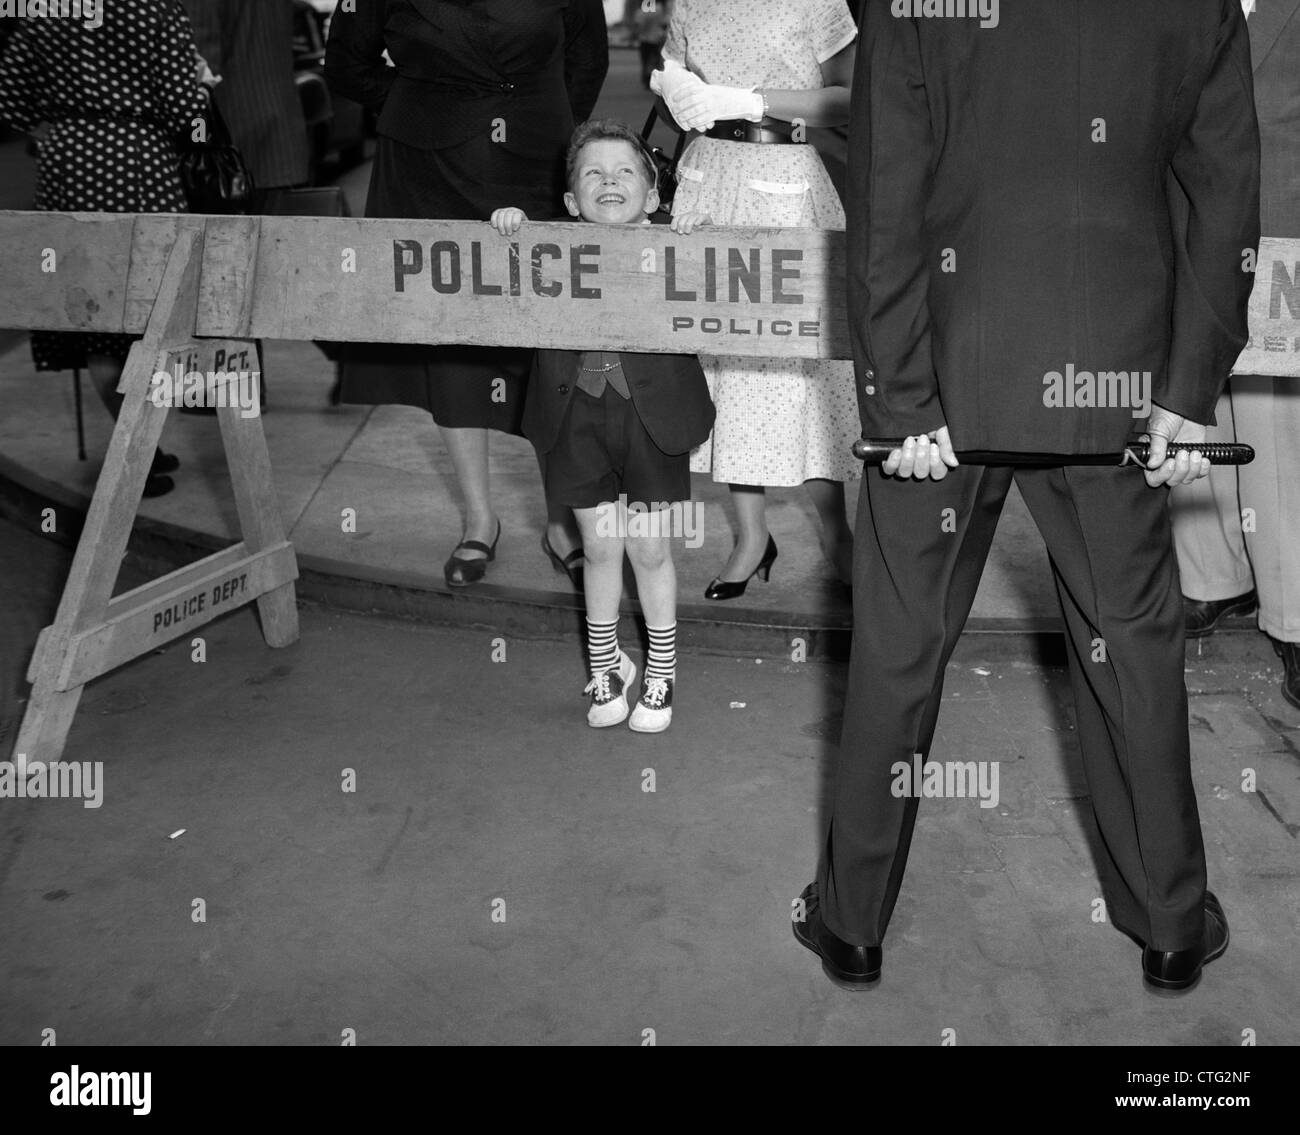 1950s BOY LOOKING OVER POLICE BARRICADE AT POLICE OFFICER WHOSE BACK IS TO THE CAMERA CROWD OF PEOPLE IN BACKGROUND OUTDOOR Stock Photo